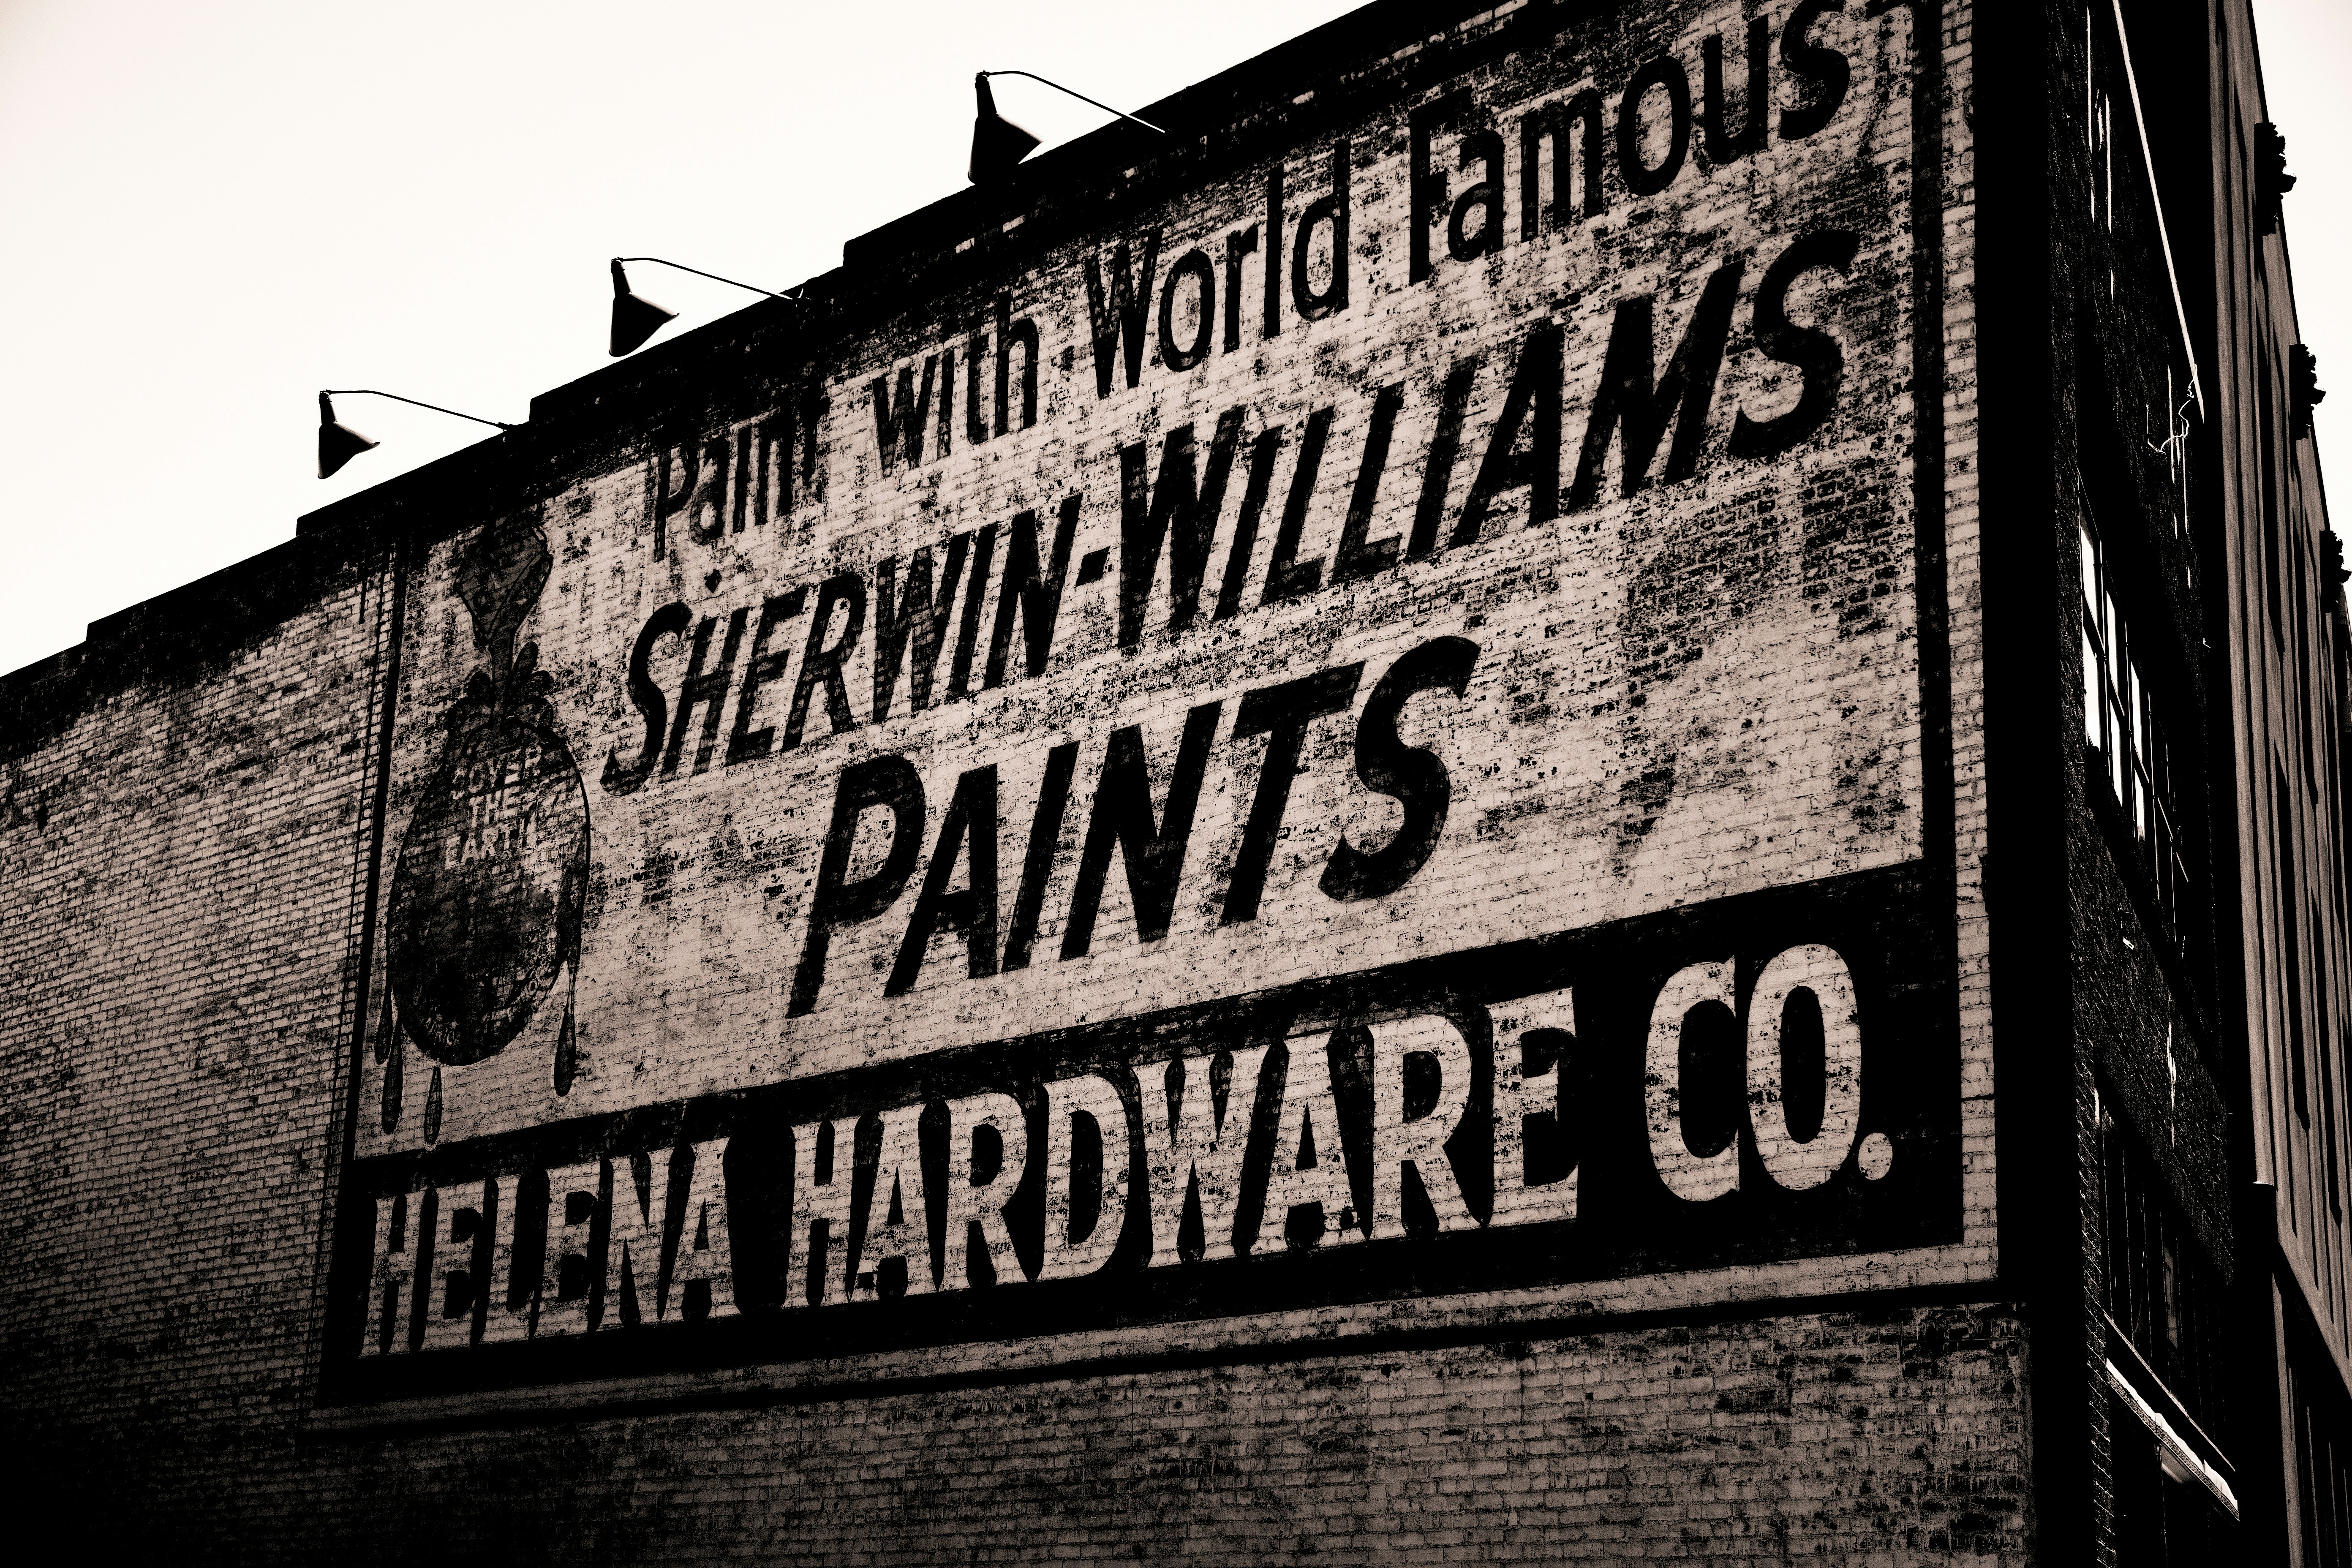 Old Sherwin Paint sign